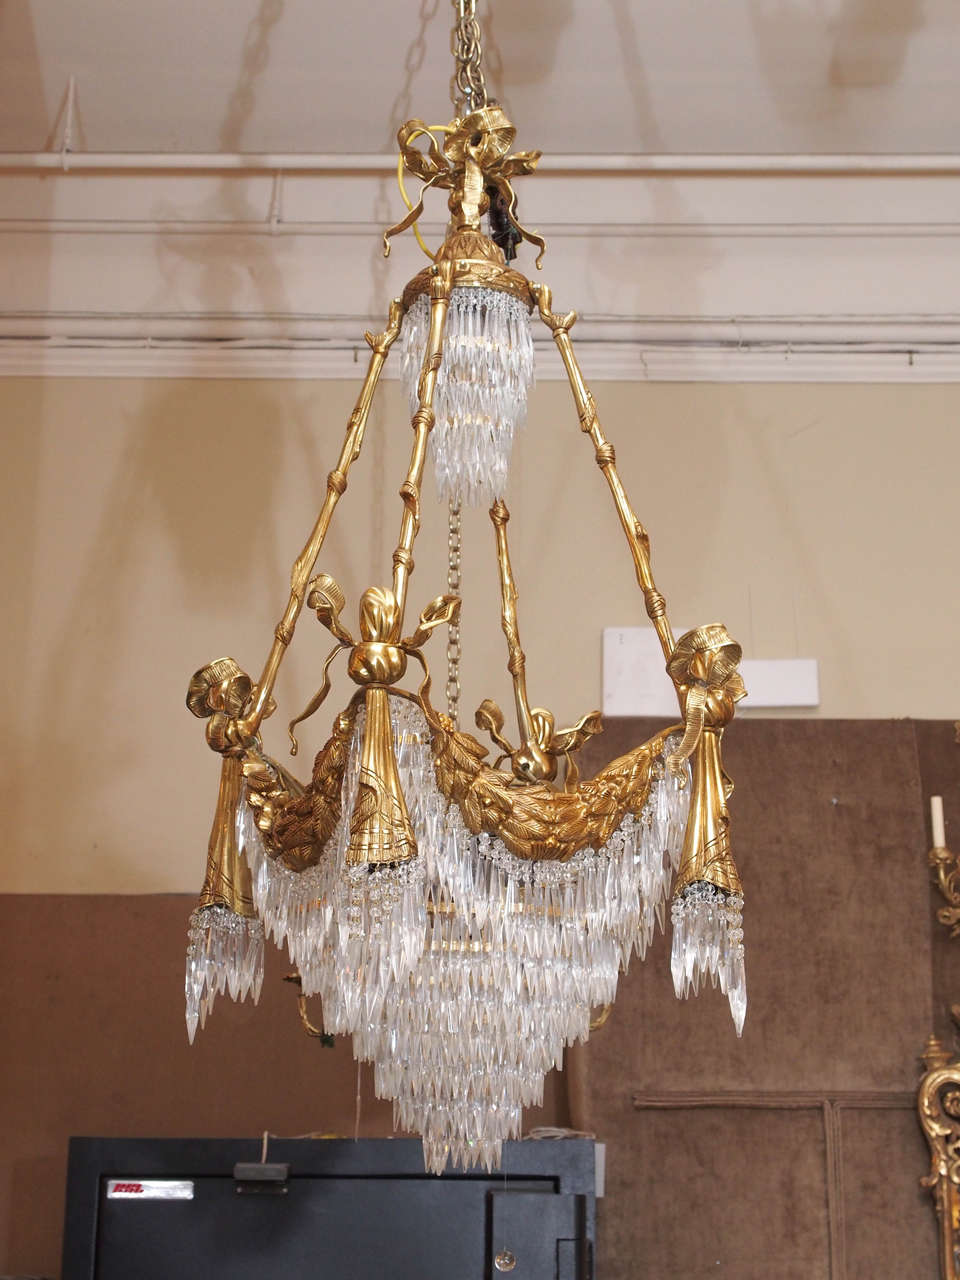 Pair of fabulous Empress Eugenie crystal and ormolu chandeliers. Parisian design, circa 1880s-1890s.